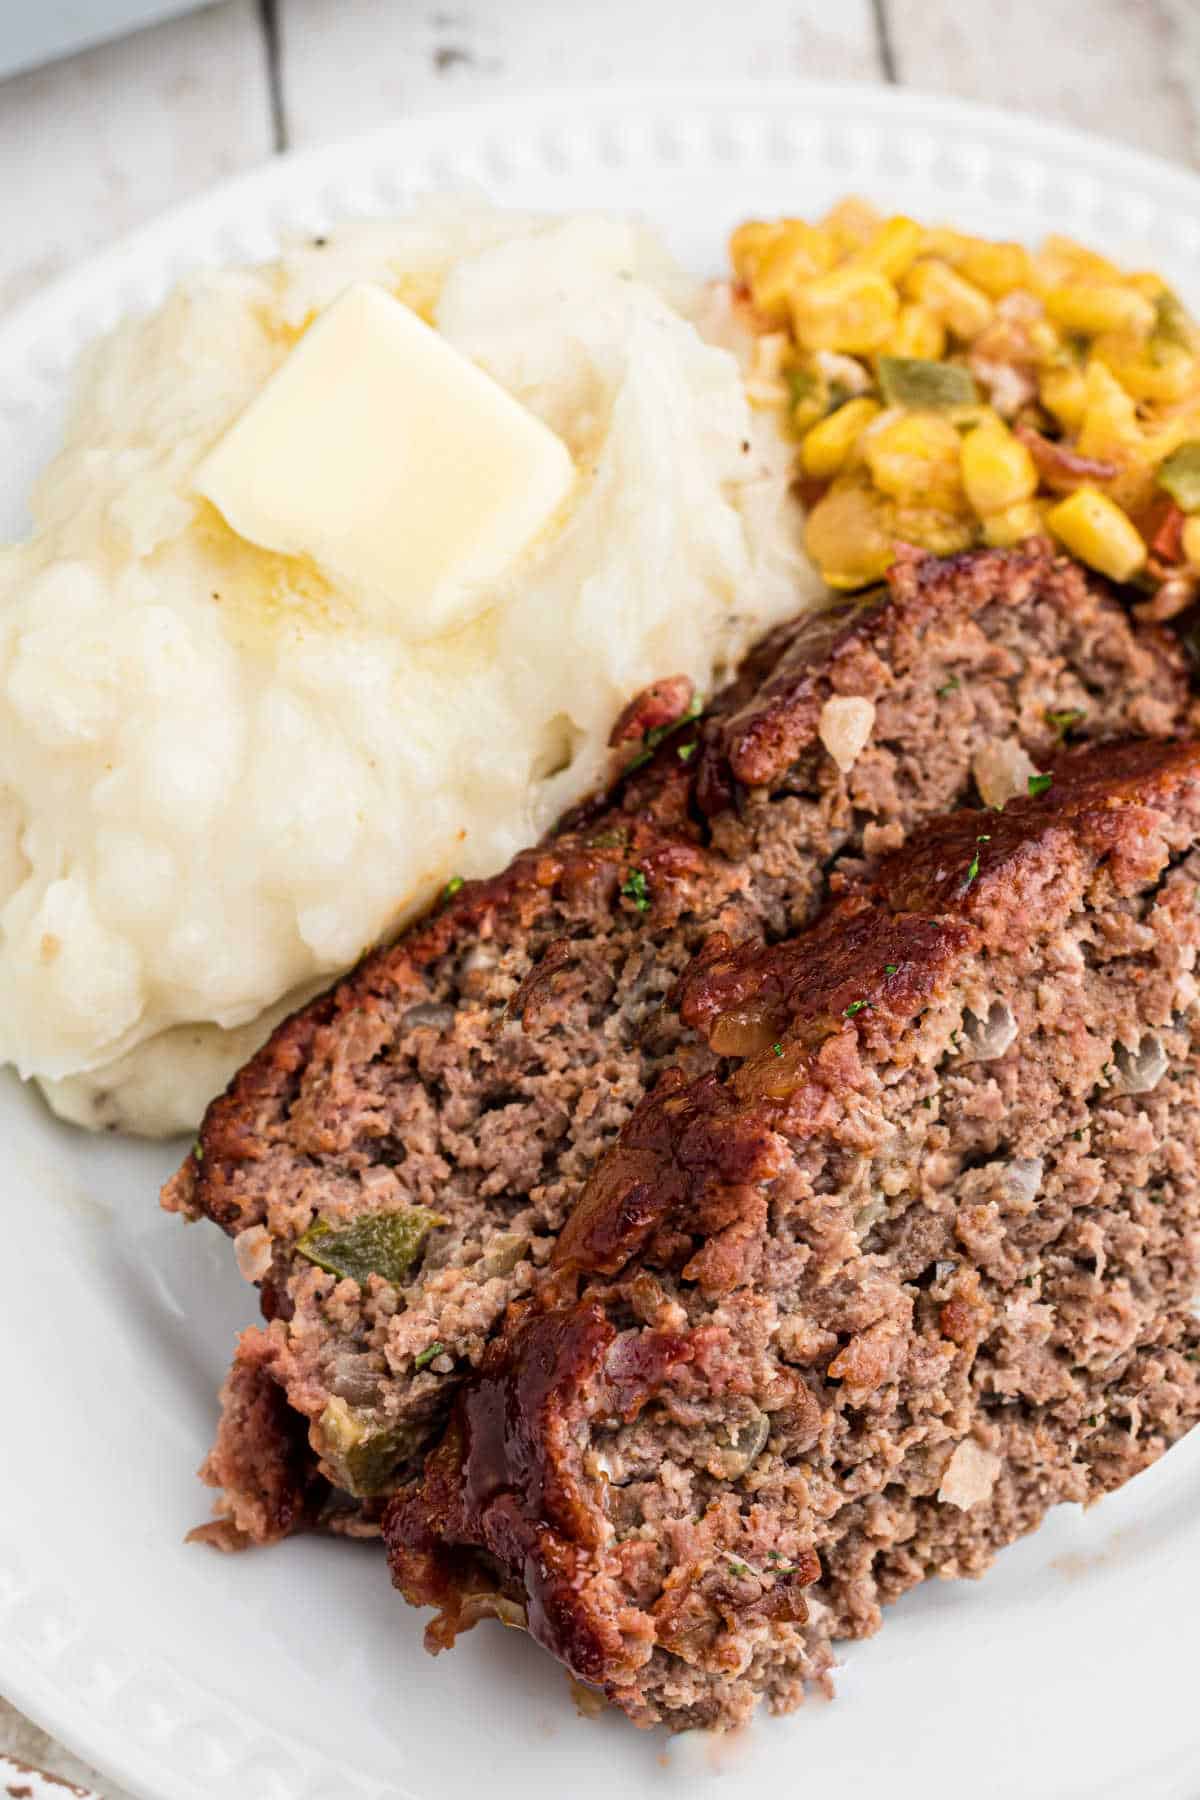 A close up image of a plate of meatloaf with mashed potatoes and corn.